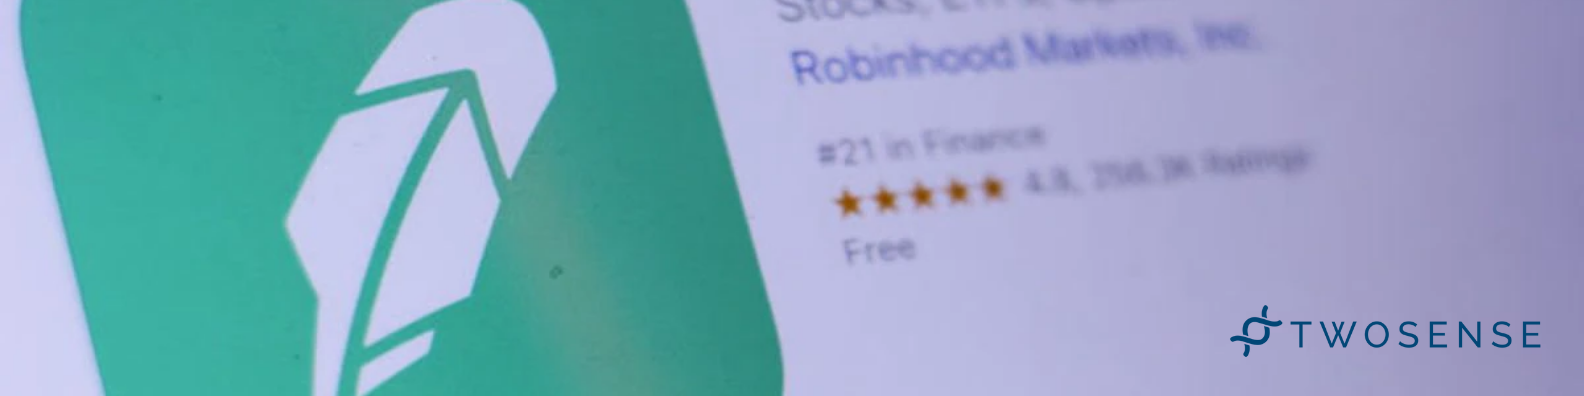 Robinhood Breach Once Again Reminds Us Why MFA Alone Is Not Enough